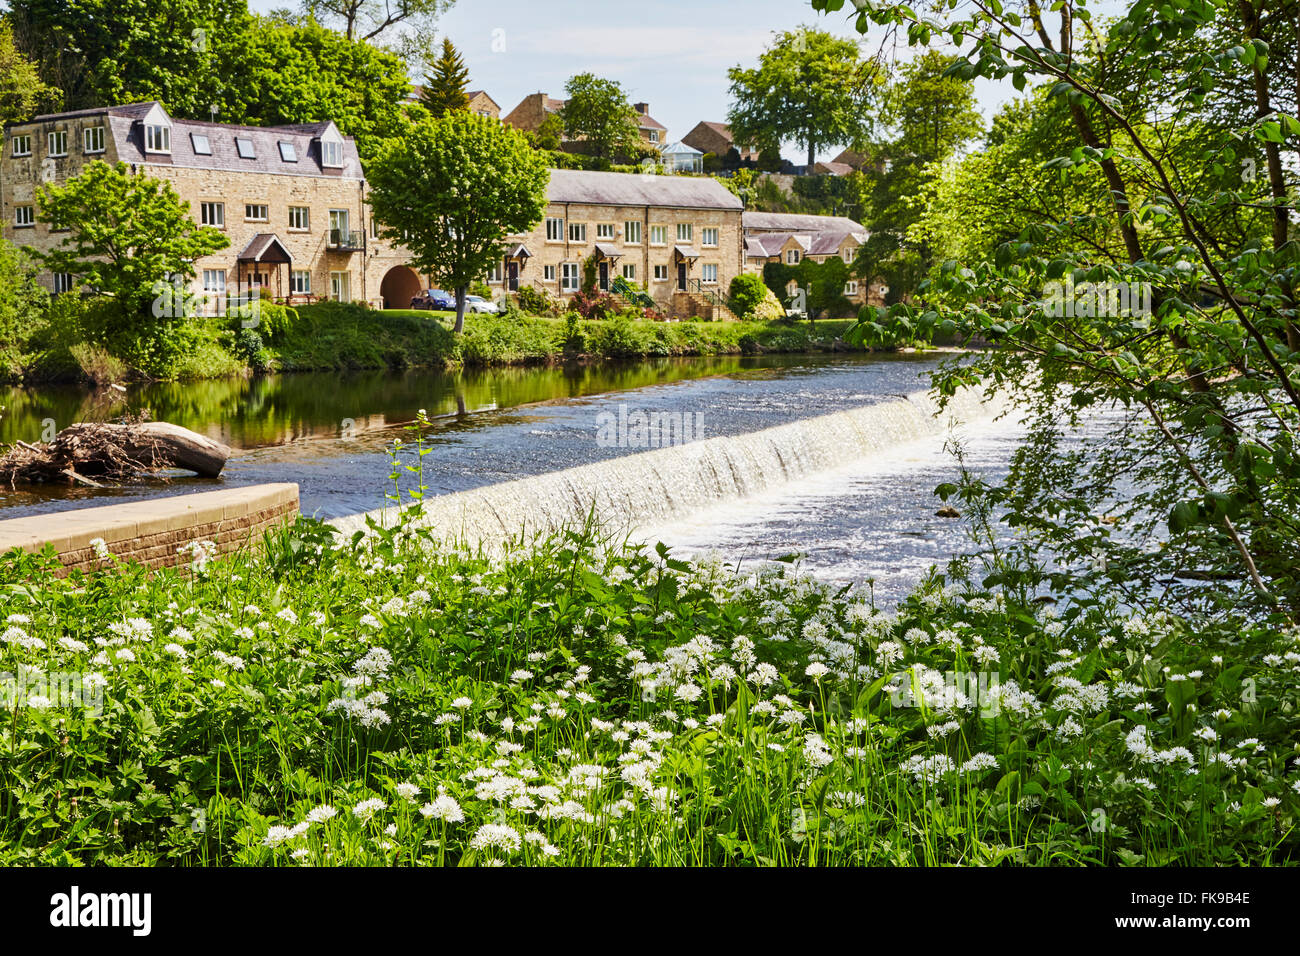 View of the weir on the River Wharfe at Boston Spa, West Yorkshire, England, UK. Stock Photo